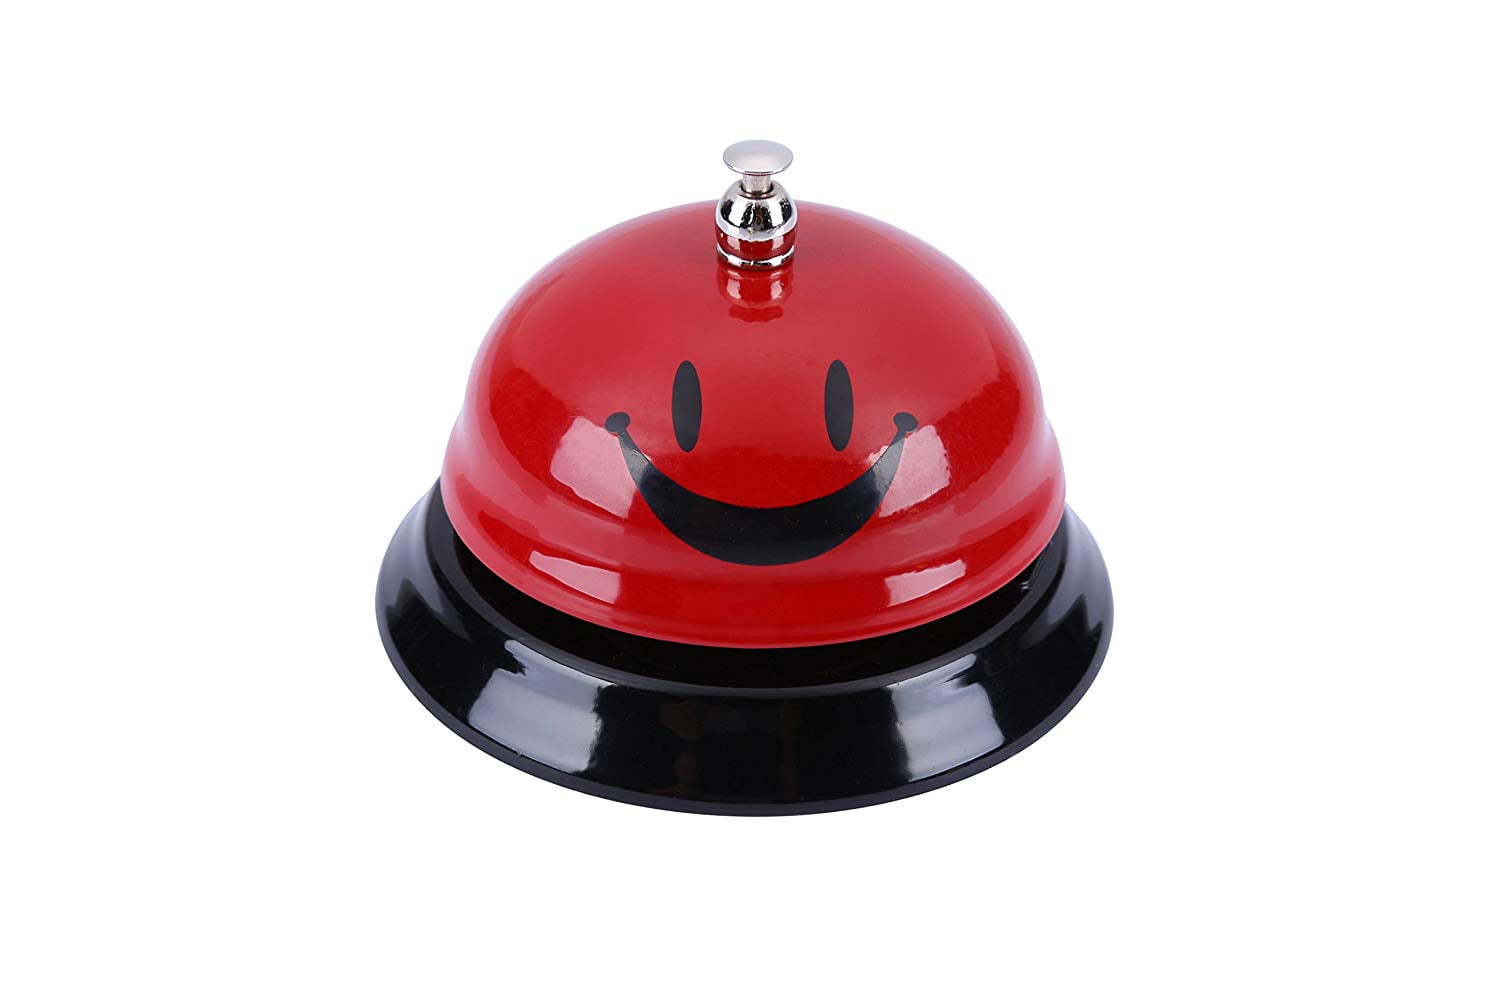 Desk Kitchen Hotel Counter Reception Restaurant Bar Ring for Service Call Bell 